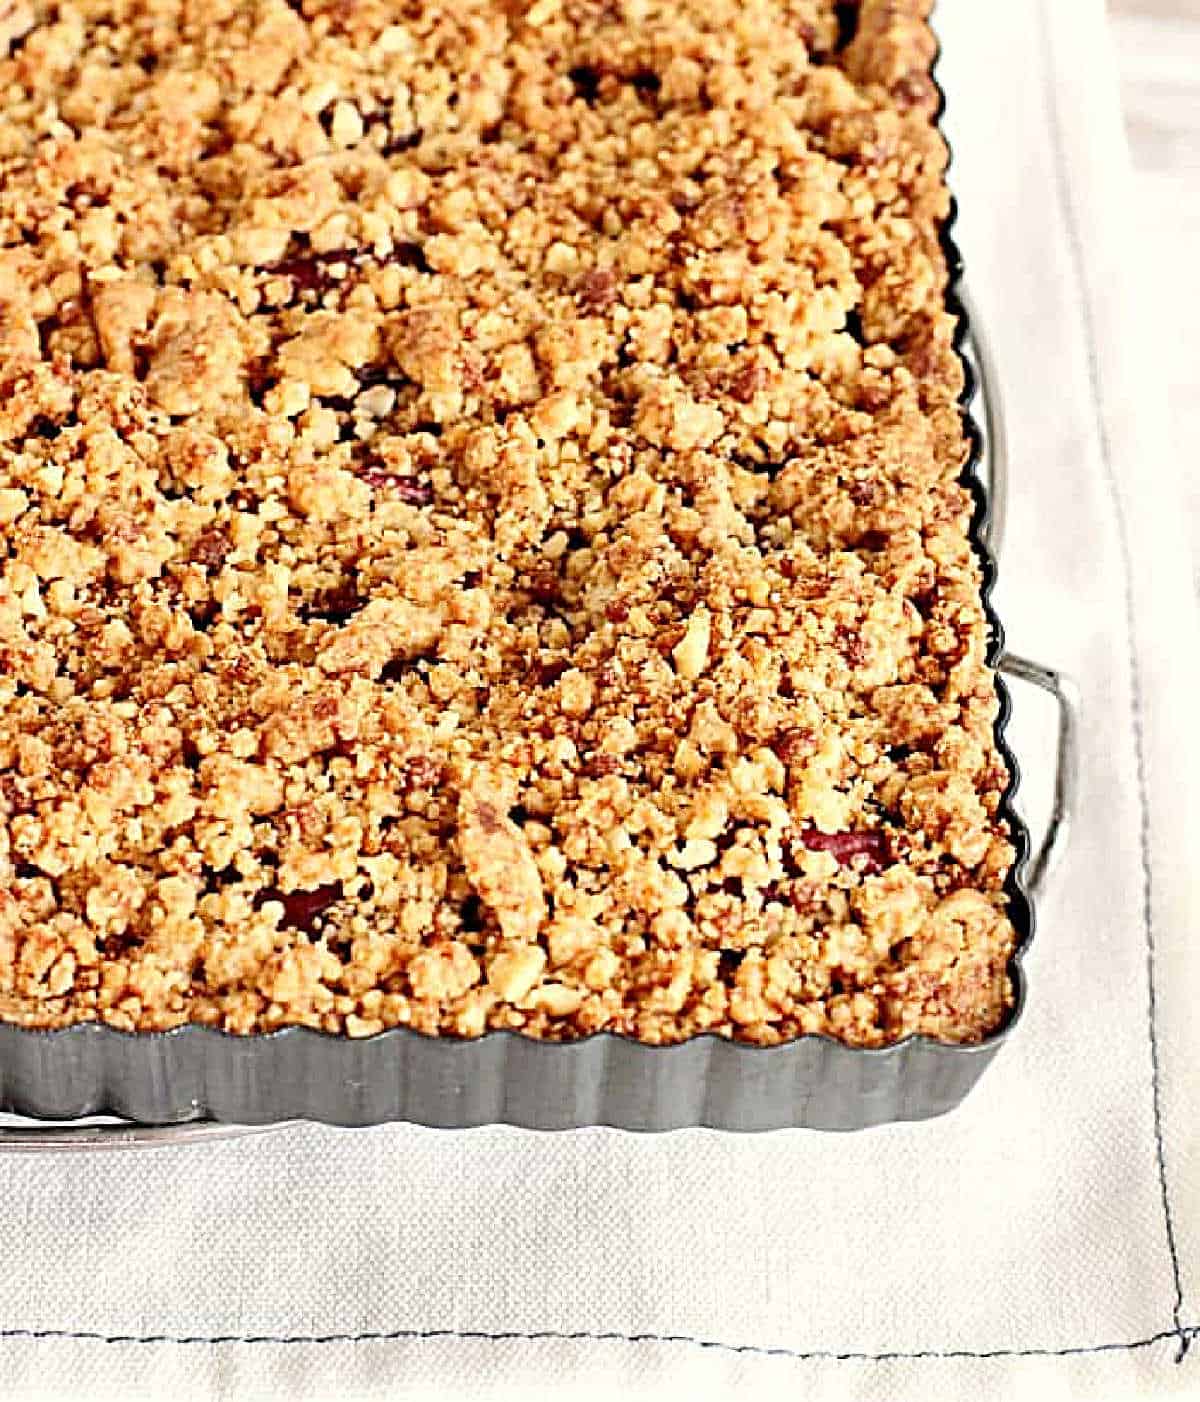 Top view of crumble topped square tart pan on white cloth